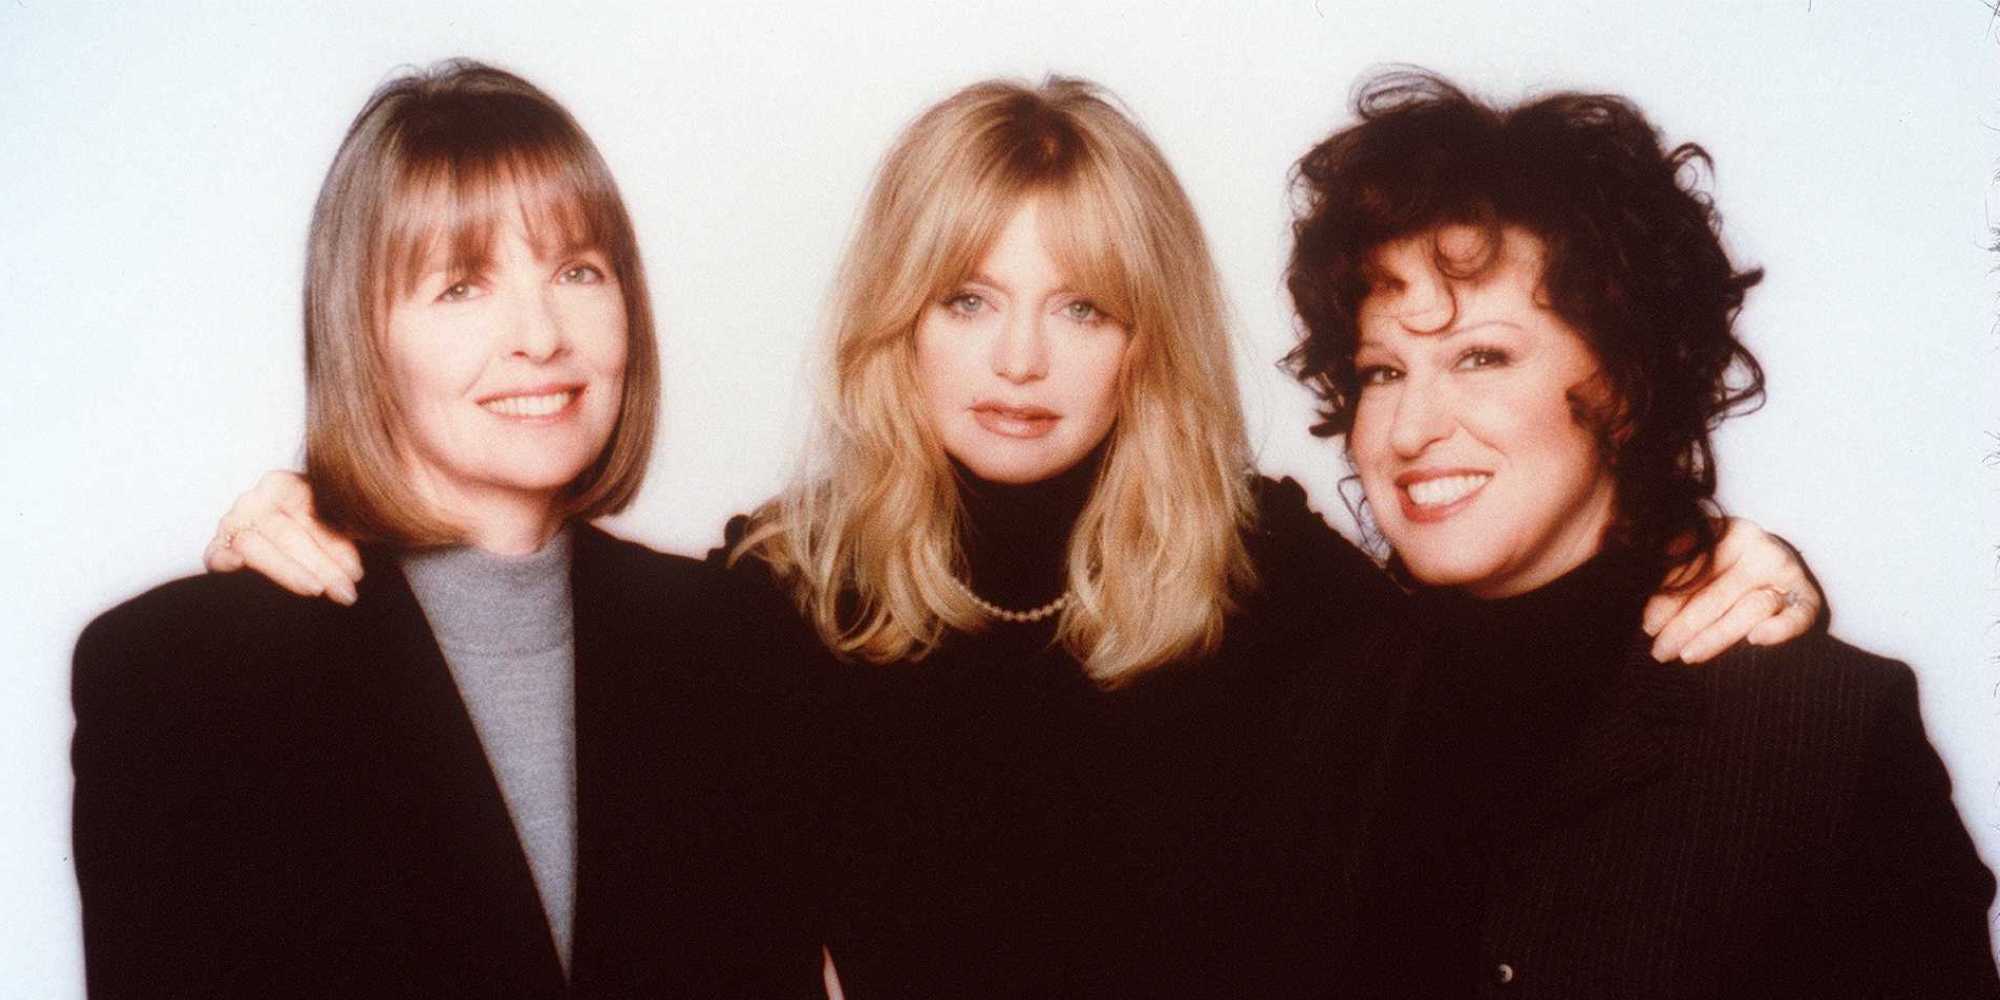 DIANE KEATON, GOLDIE HAWN, BETTE MIDLER STAR IN THE FIRST WIVES CLUB